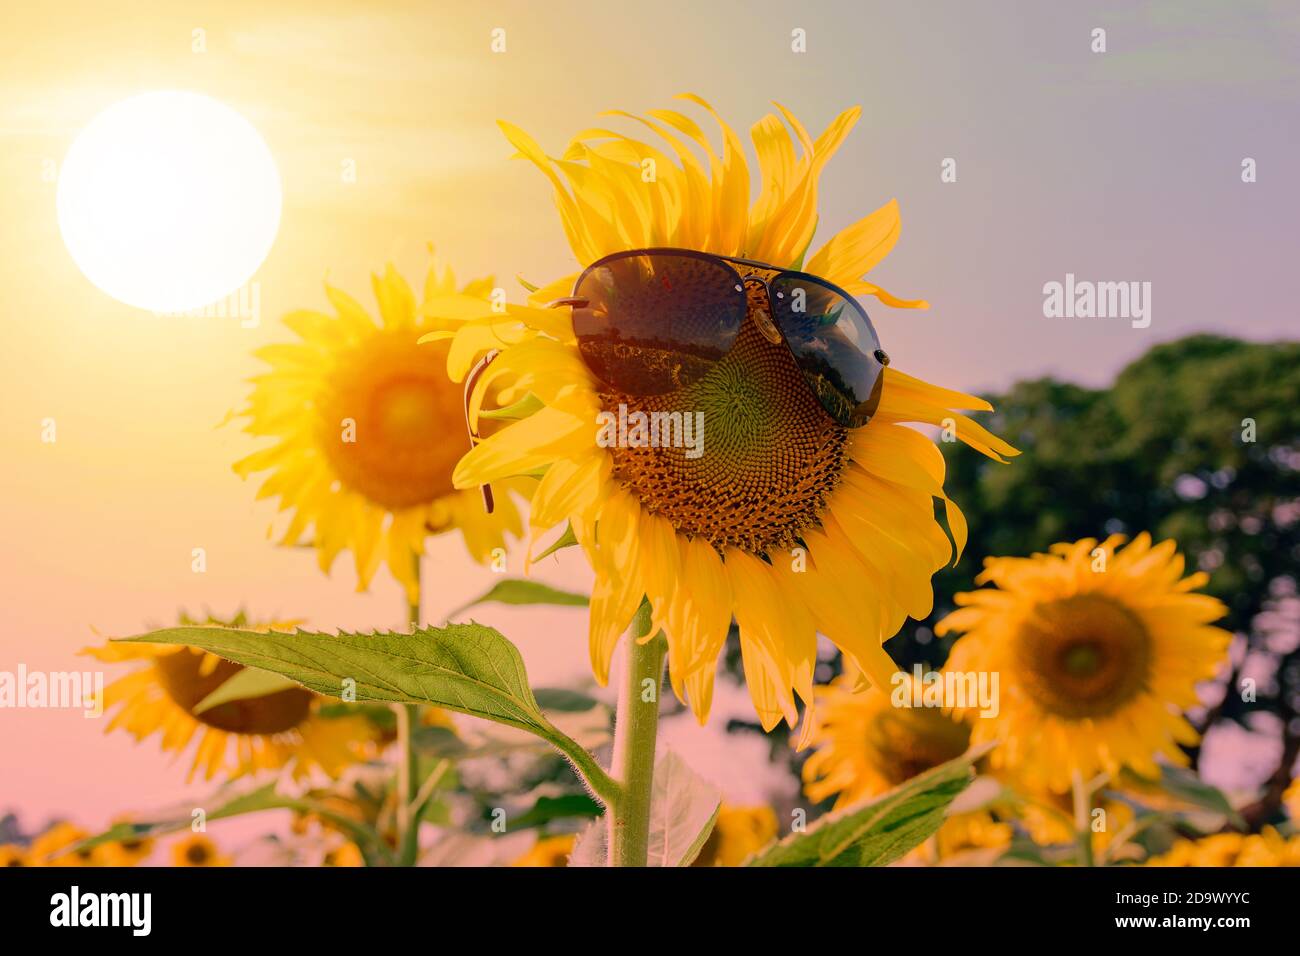 Put the sunglasses on a beautiful sunflower in the garden with colorful sunlight;Vintage filter tone. Stock Photo